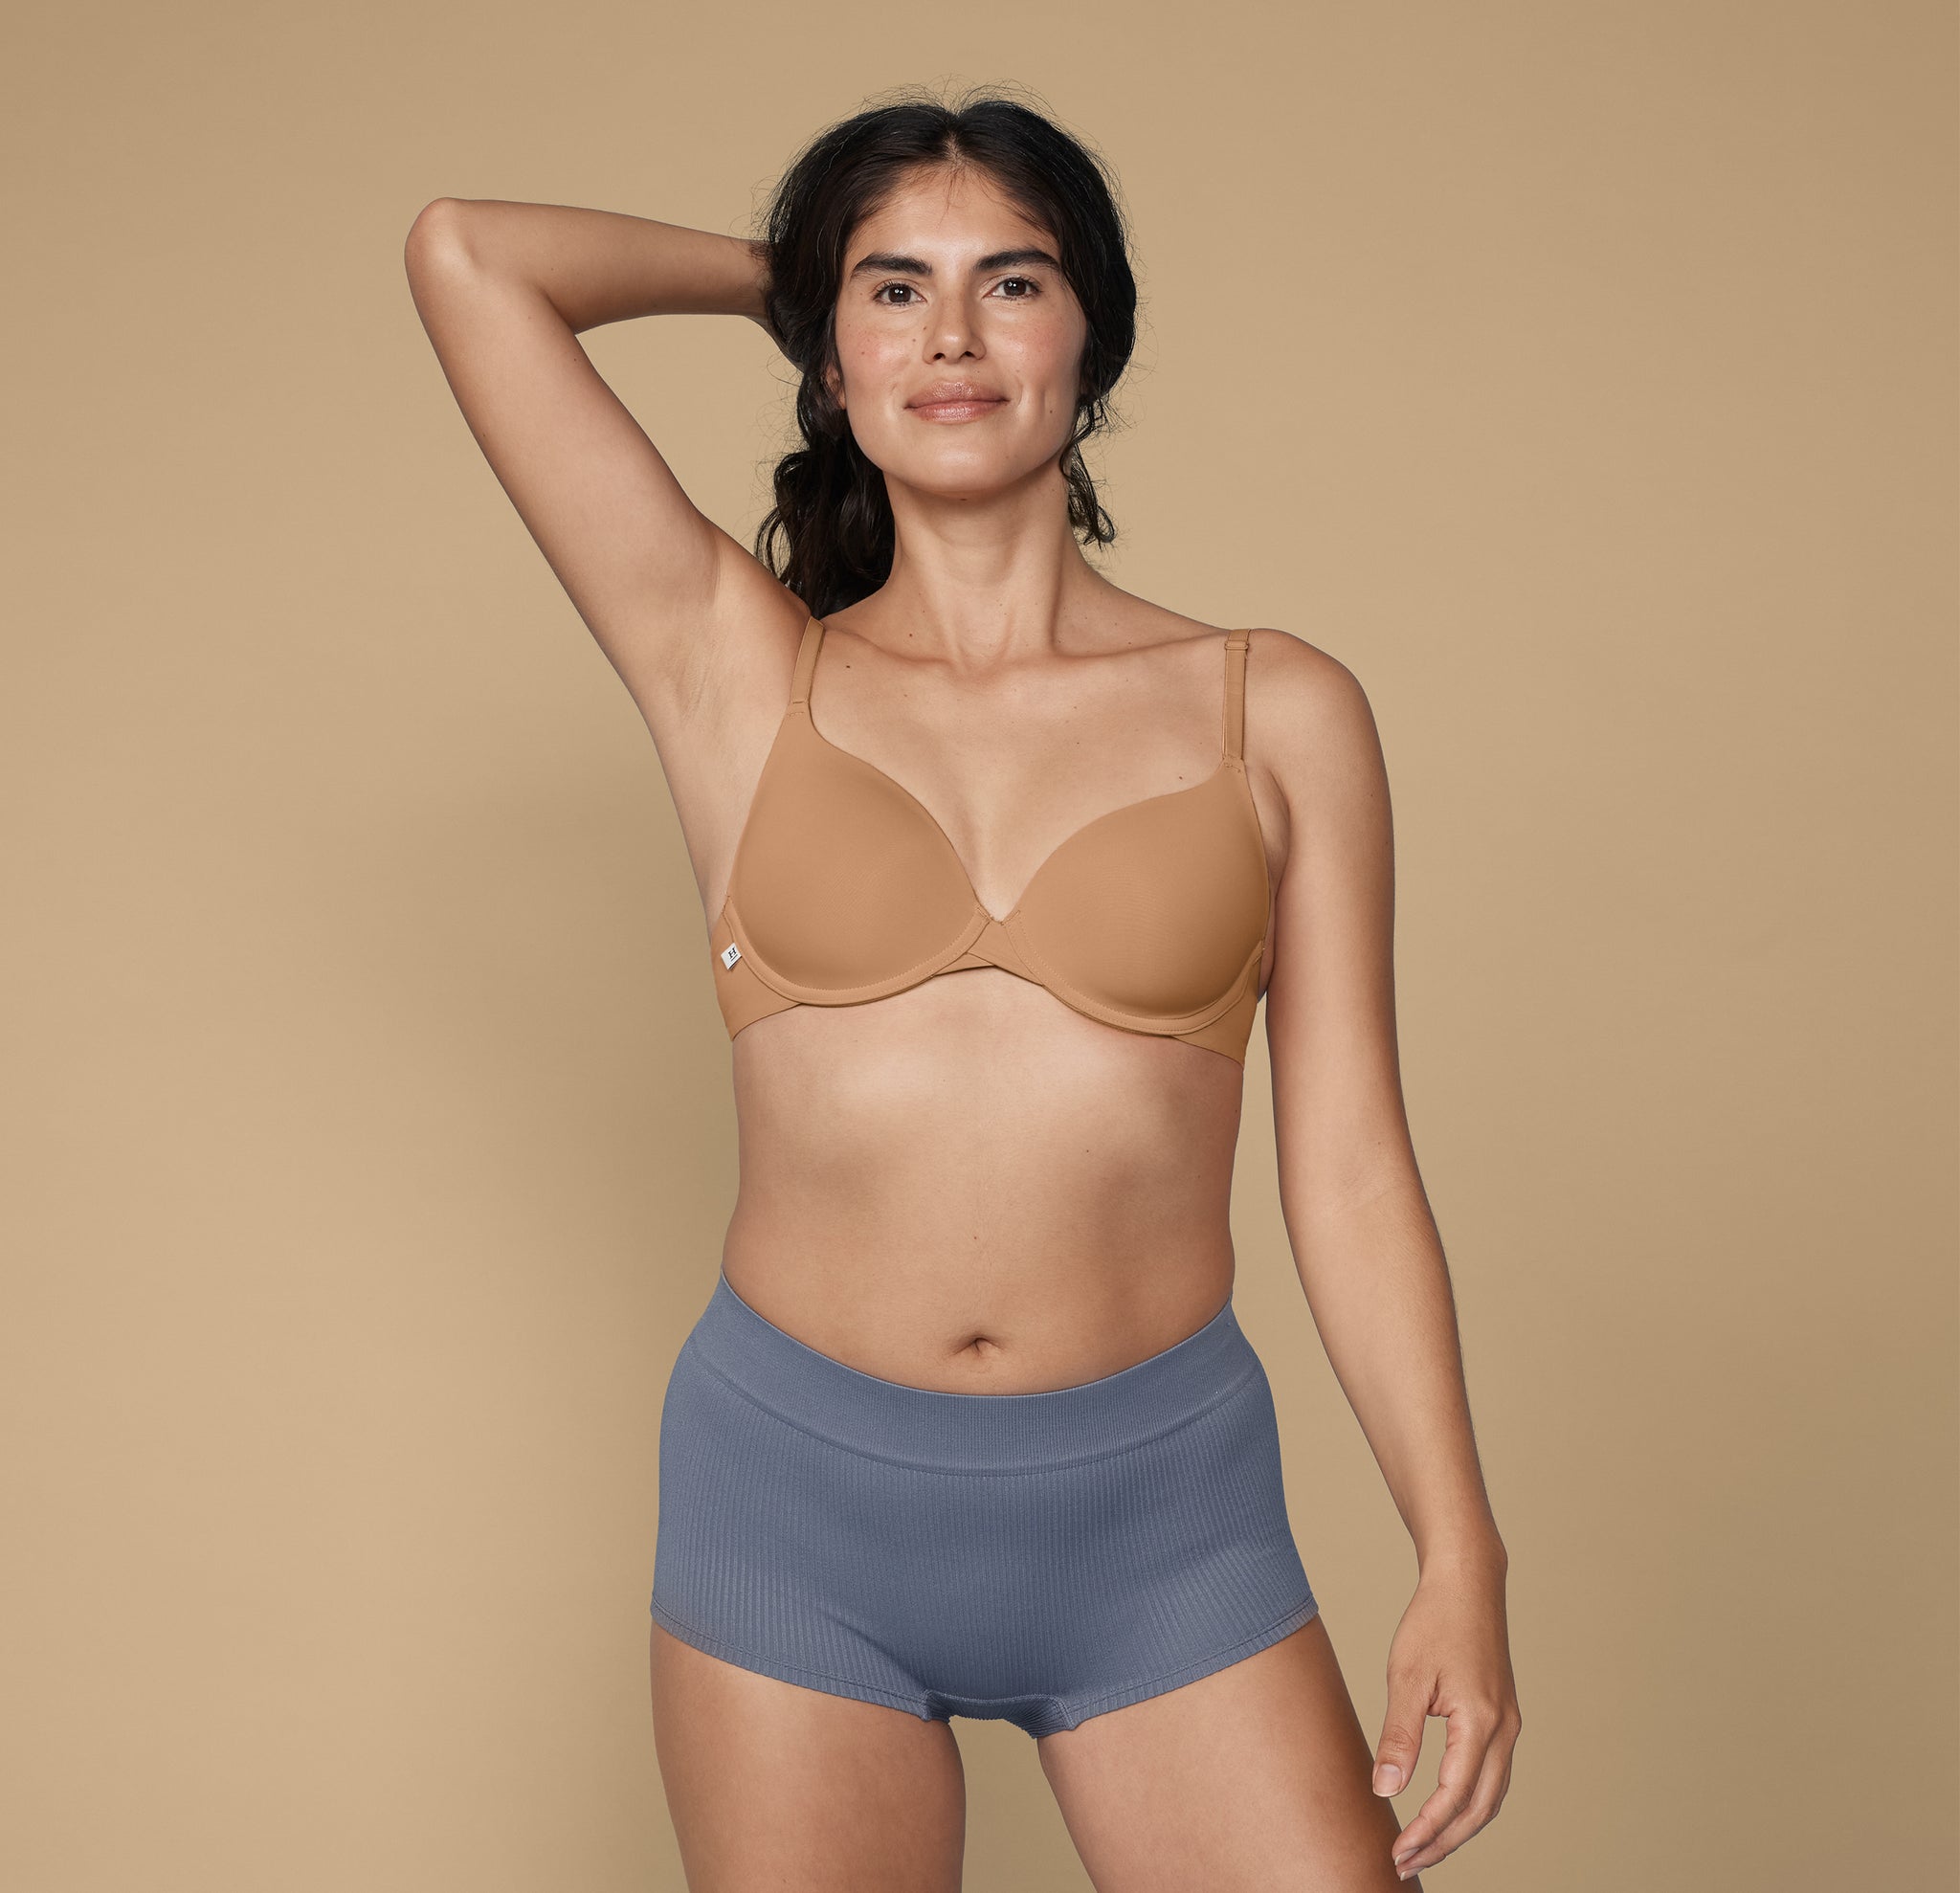 Harper Wilde The Base Bra Review, Price and Features - Pros and Cons of Harper  Wilde The Base Bra